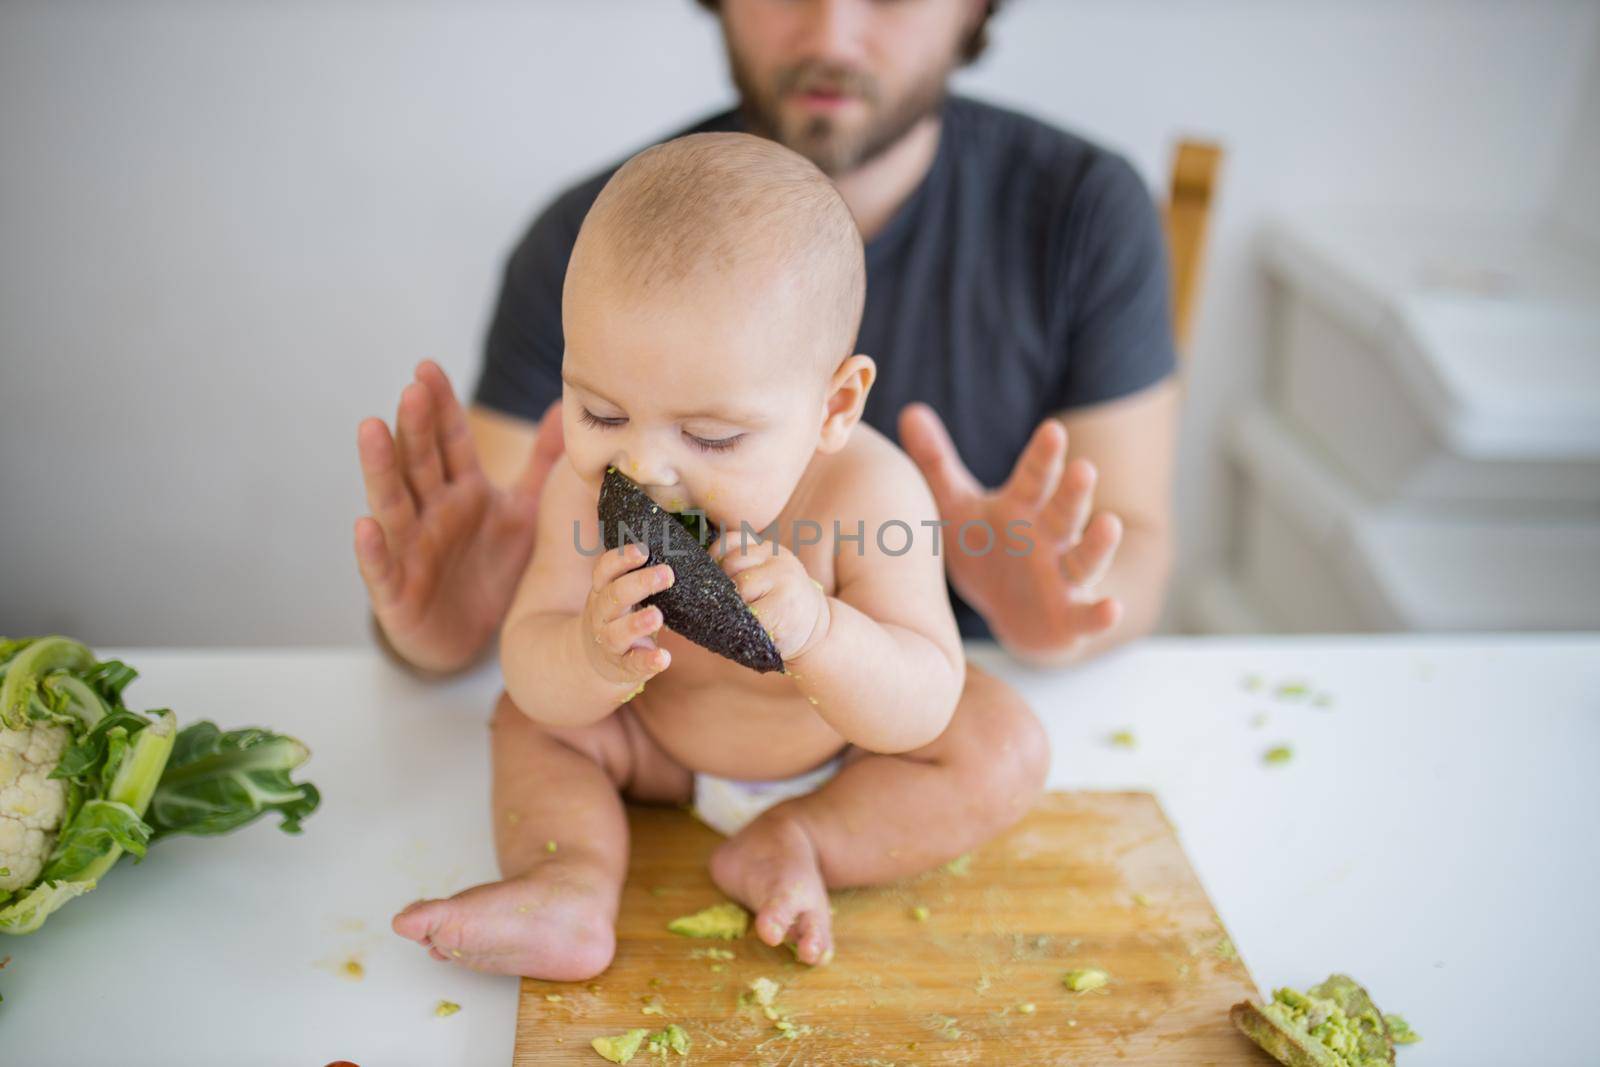 Happy baby sitting on wooden board and adorably biting avocado peel. Father lovingly holding his happy baby daughter above table. Babies interacting with food